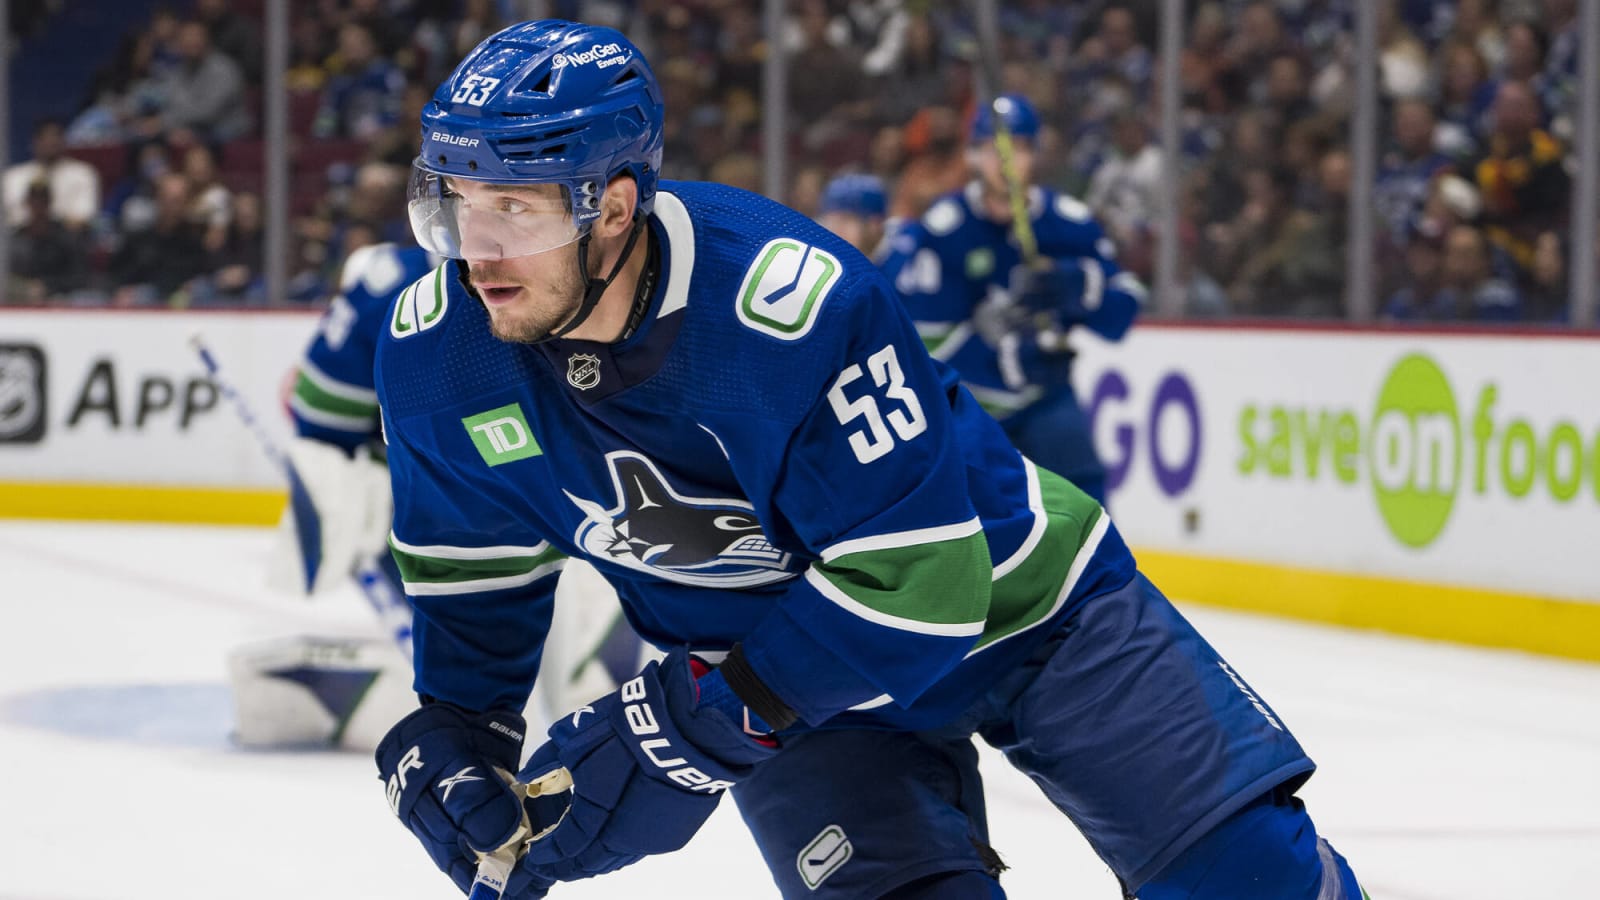 Canucks may look to rebuild on the fly amid rough start